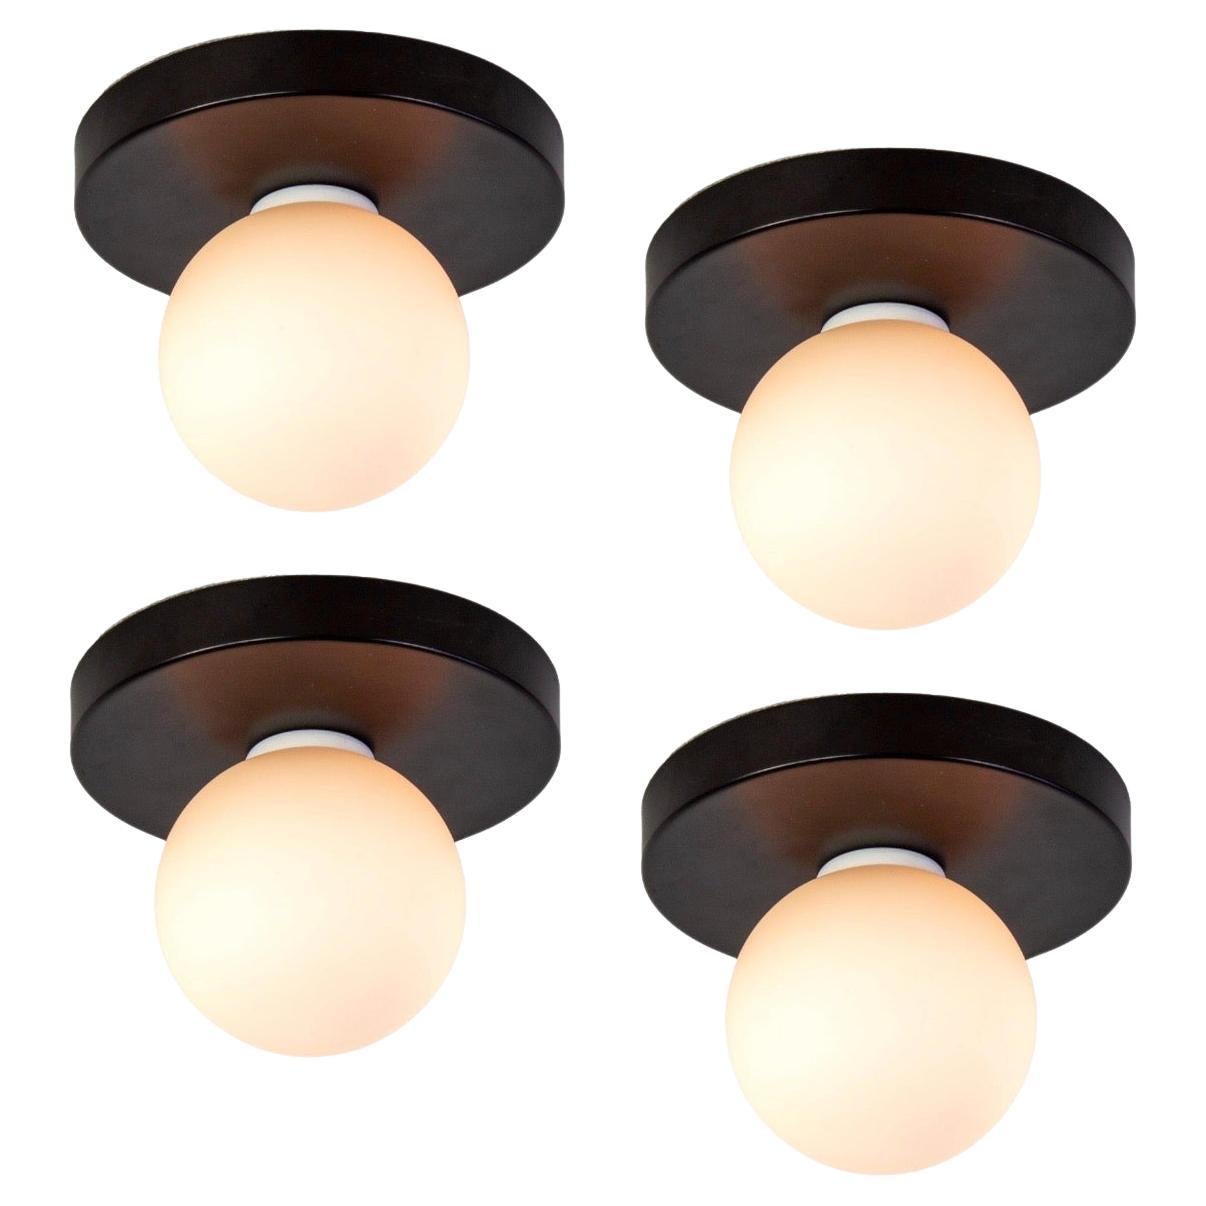 Set of 4 Globe Flush Mounts by Research.Lighting, Black Made to Order For Sale